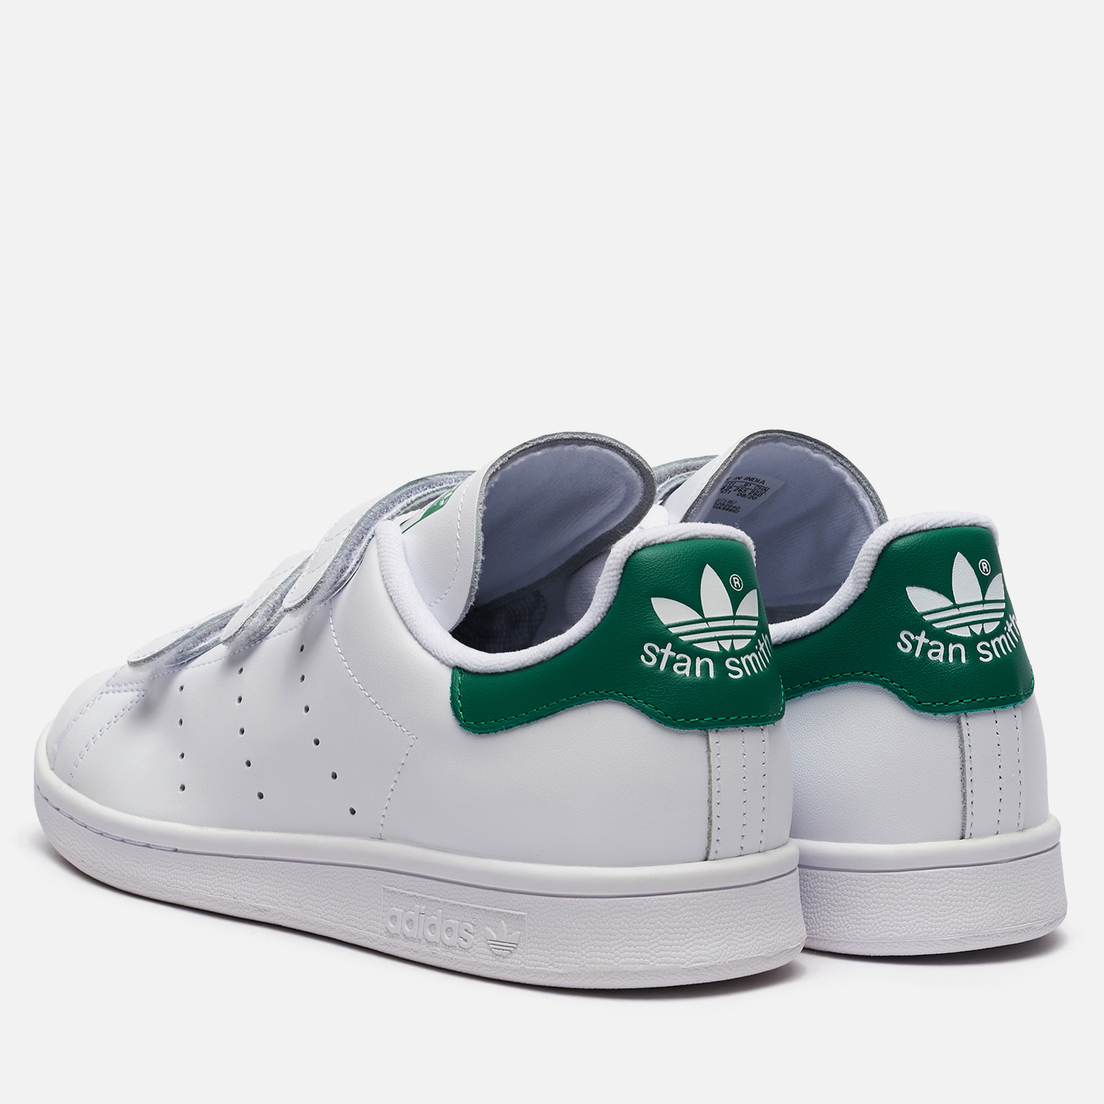 adidas shoes stan smith green